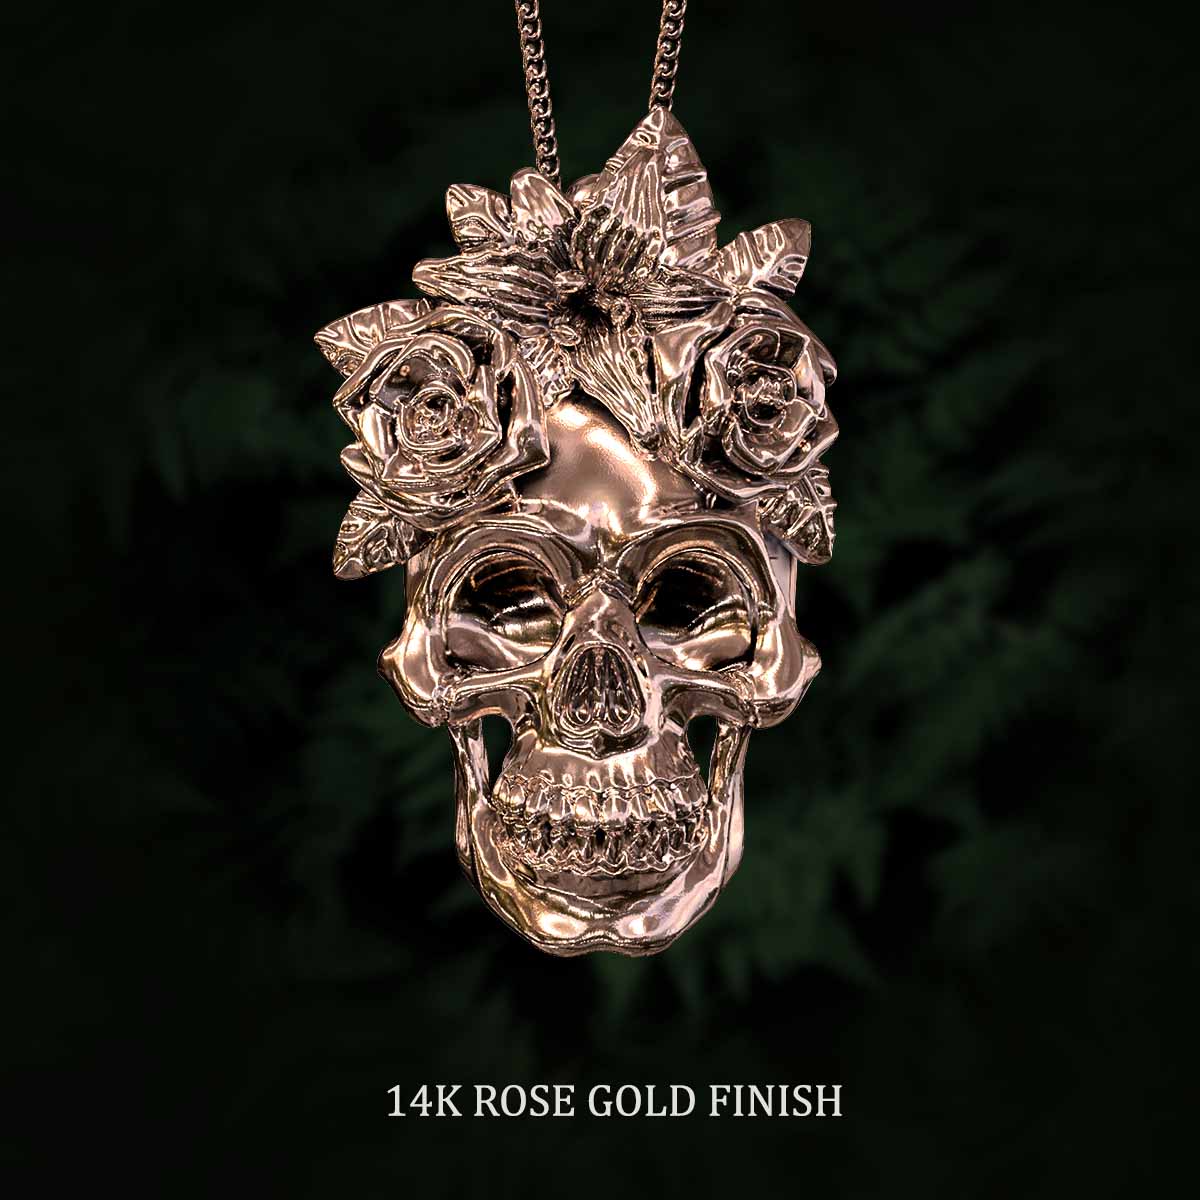     14k-Rose-Gold-Finish-Human-Skull-and-Flowers-Pendant-Jewelry-For-Necklace